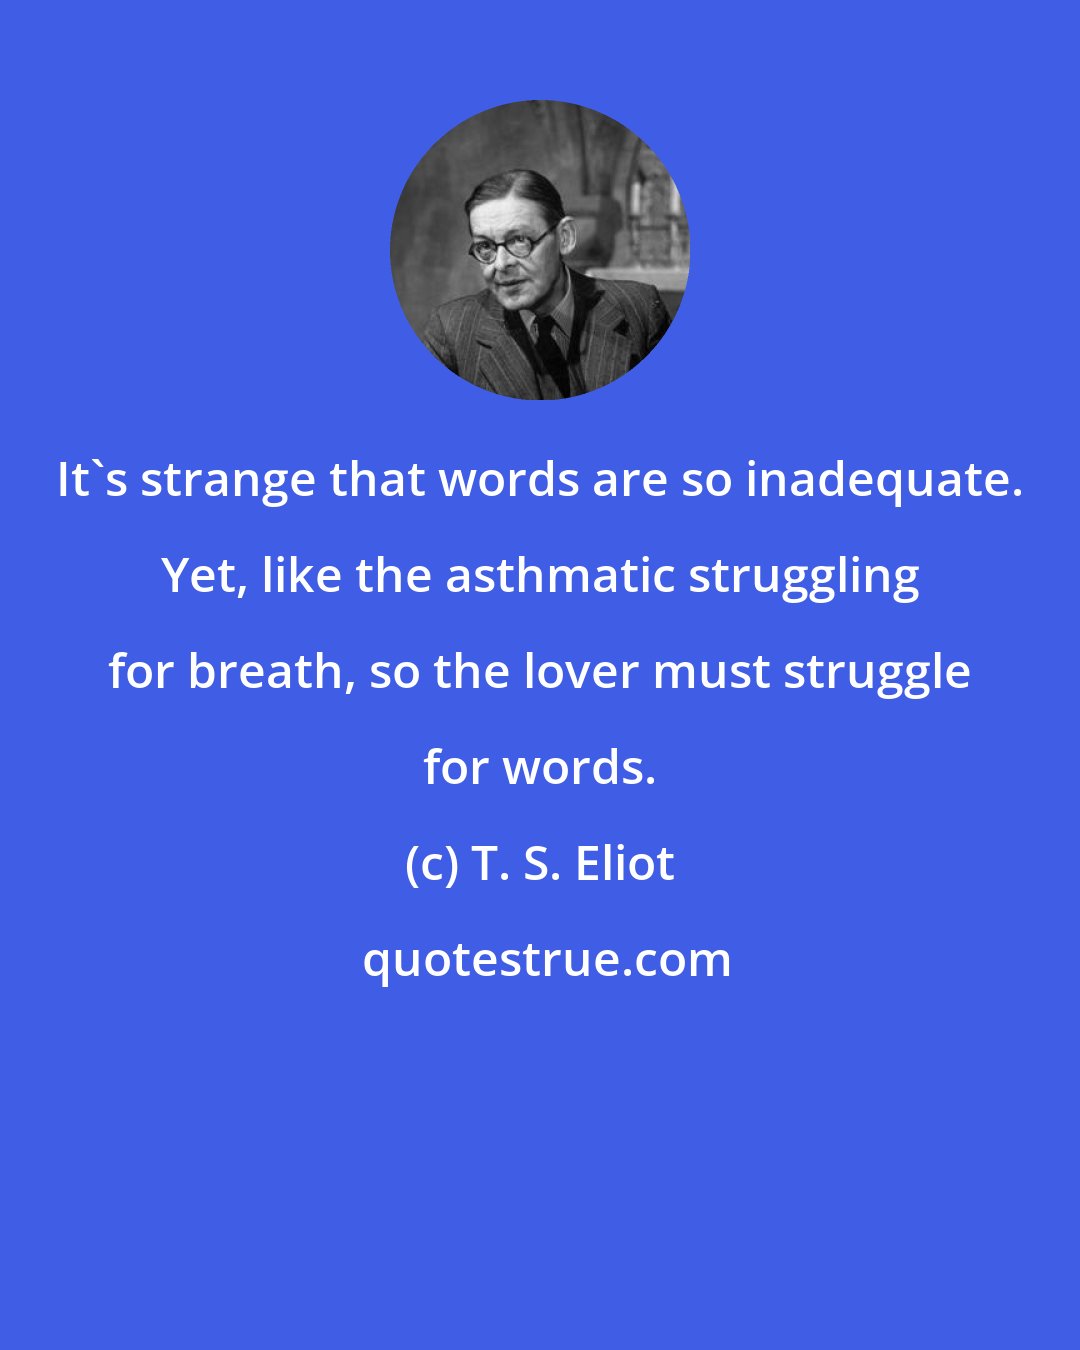 T. S. Eliot: It's strange that words are so inadequate. Yet, like the asthmatic struggling for breath, so the lover must struggle for words.